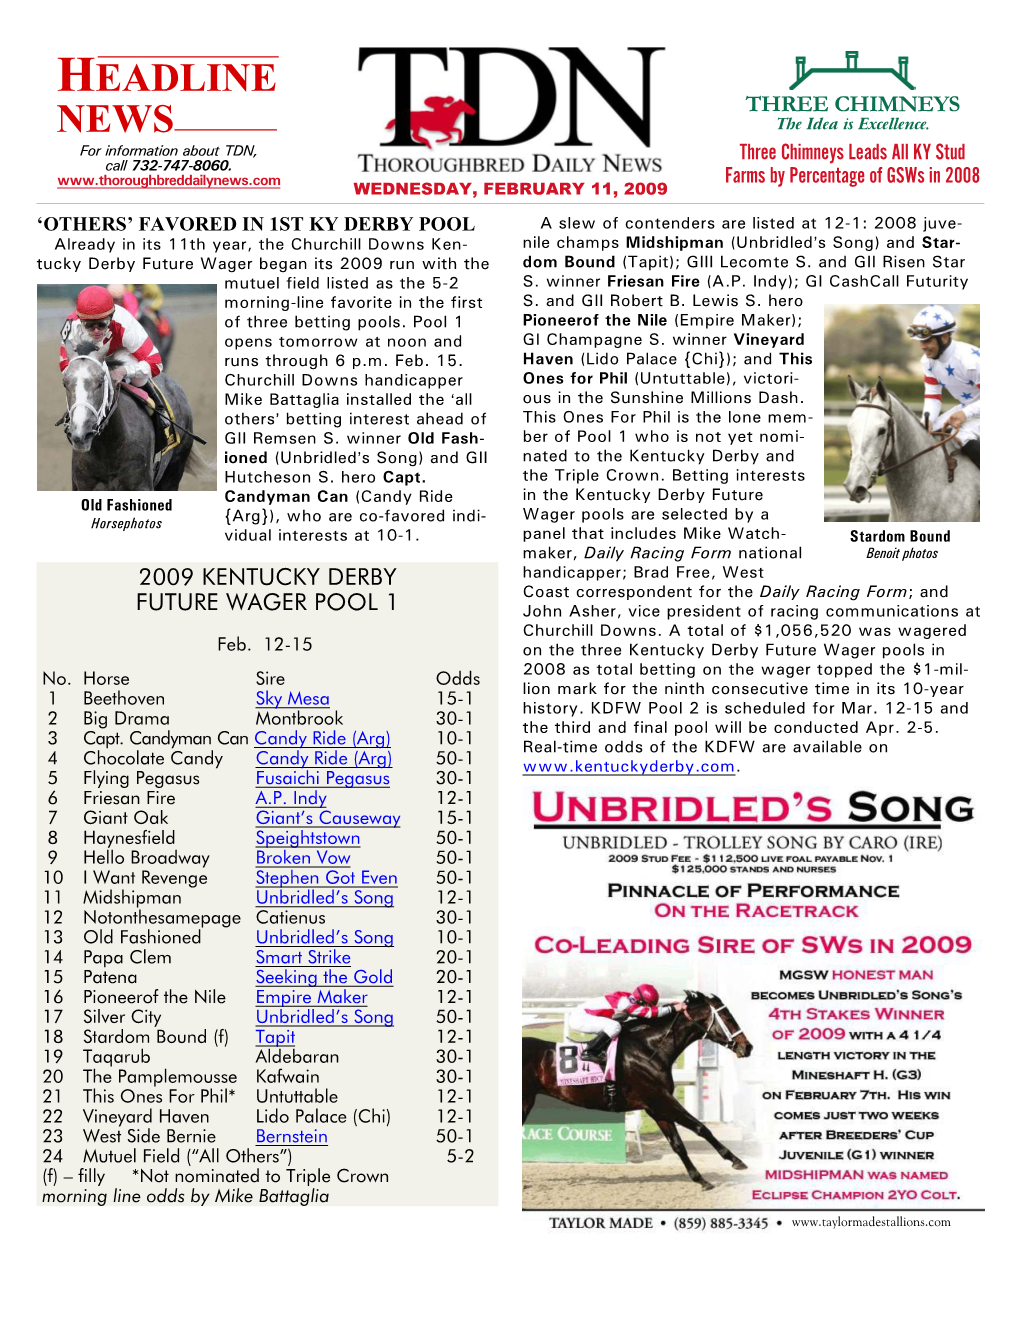 HEADLINE NEWS • 2/11/09 • PAGE 2 of 8 Classic Crop 2009 ONE “HULL” of a PROSPECT While the Winners of the GIII Risen Star S